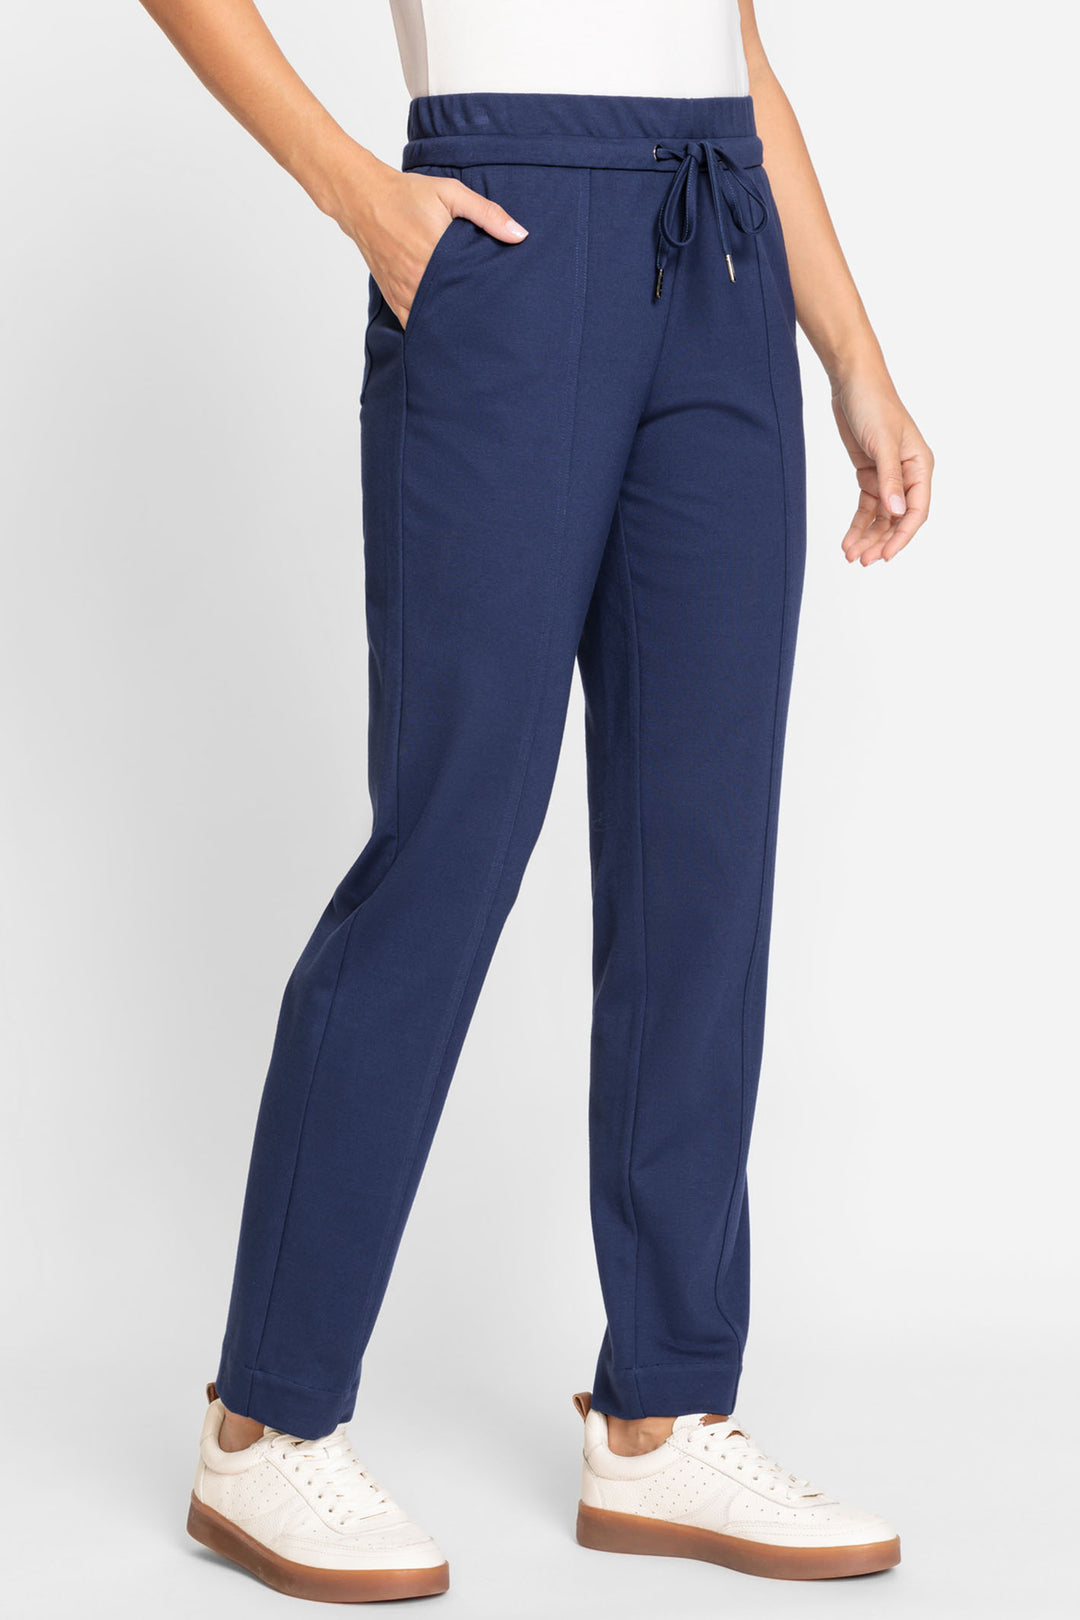 Olsen 14002017 40152 Night Blue Drawstring Waist Jersey Trousers - Experience Boutique